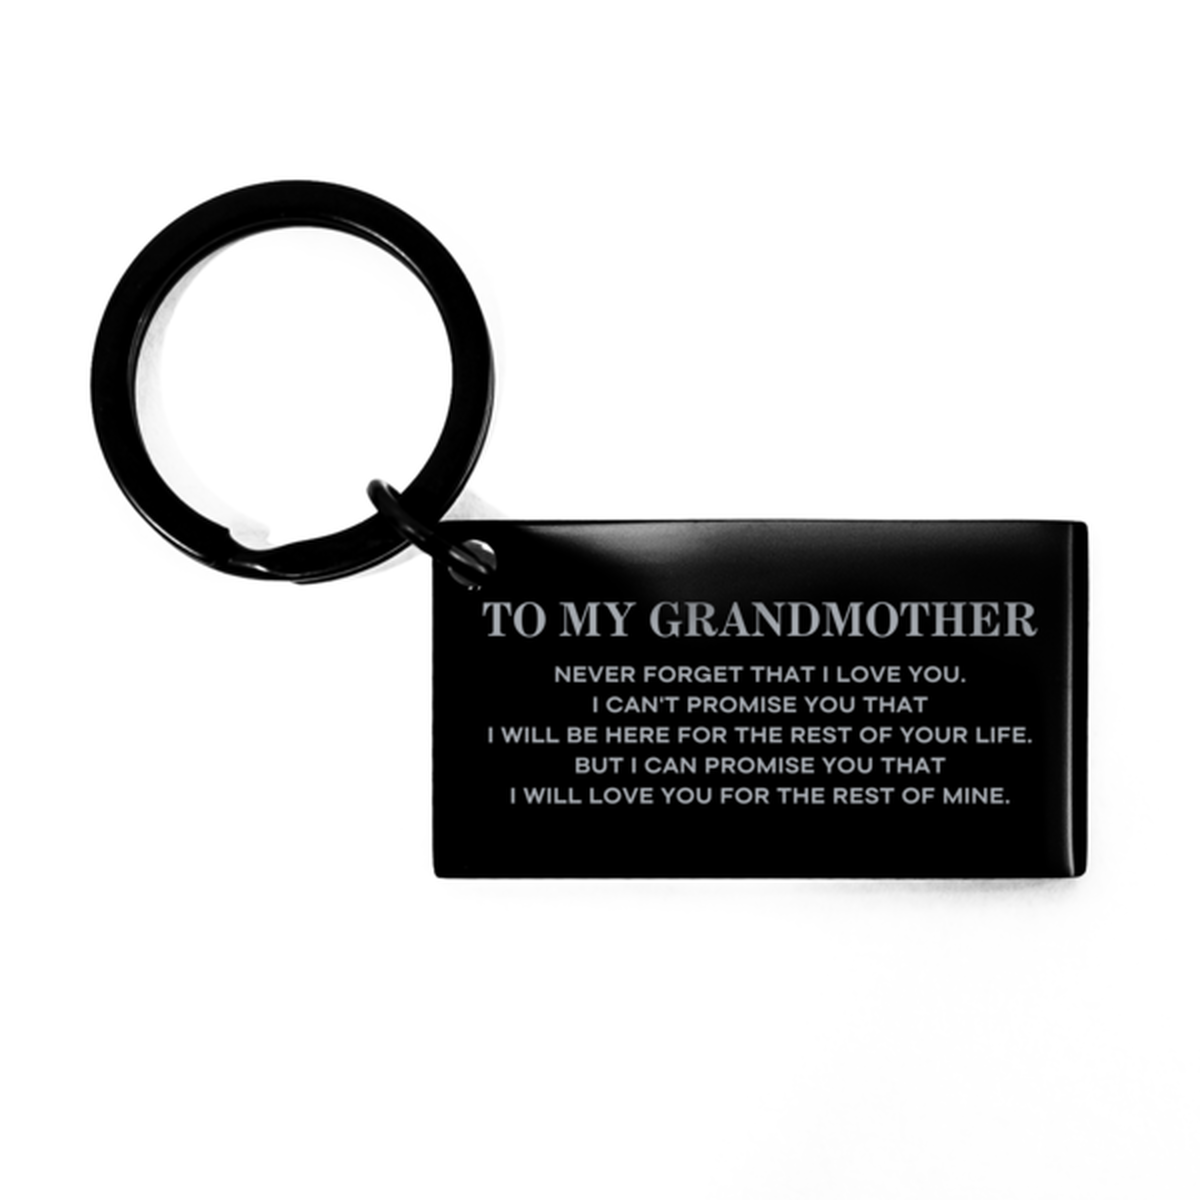 To My Grandmother Gifts, I will love you for the rest of mine, Love Grandmother Keychain, Birthday Christmas Unique Keychain For Grandmother